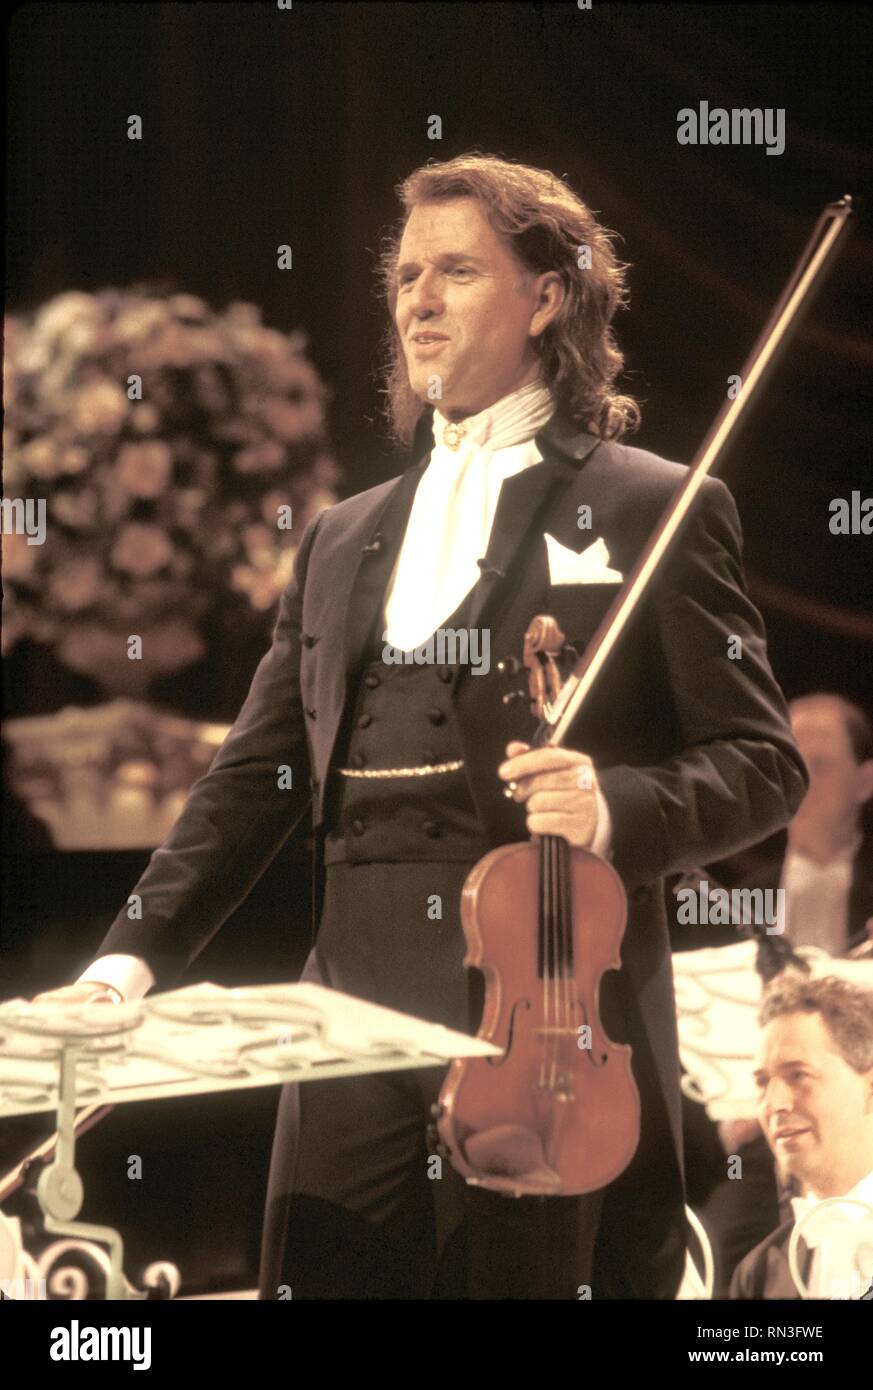 Dutch violinist, conductor, and composer André Rieu is shown performing on stage during a 'live' concert appearance. Stock Photo